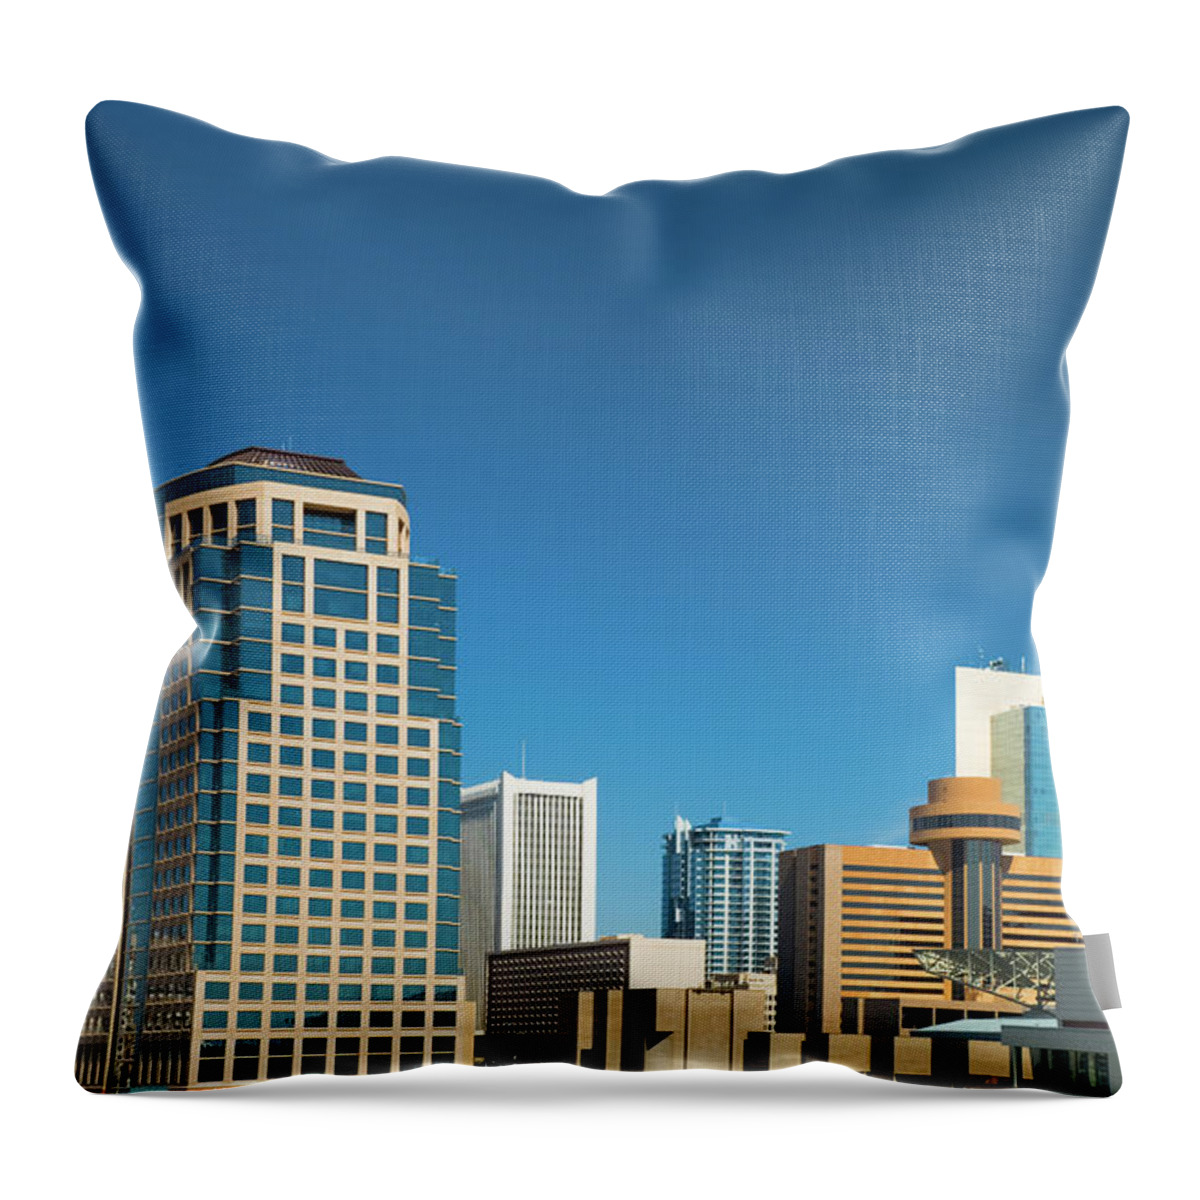 Downtown District Throw Pillow featuring the photograph Phoenix Downtown Skyline by Davel5957